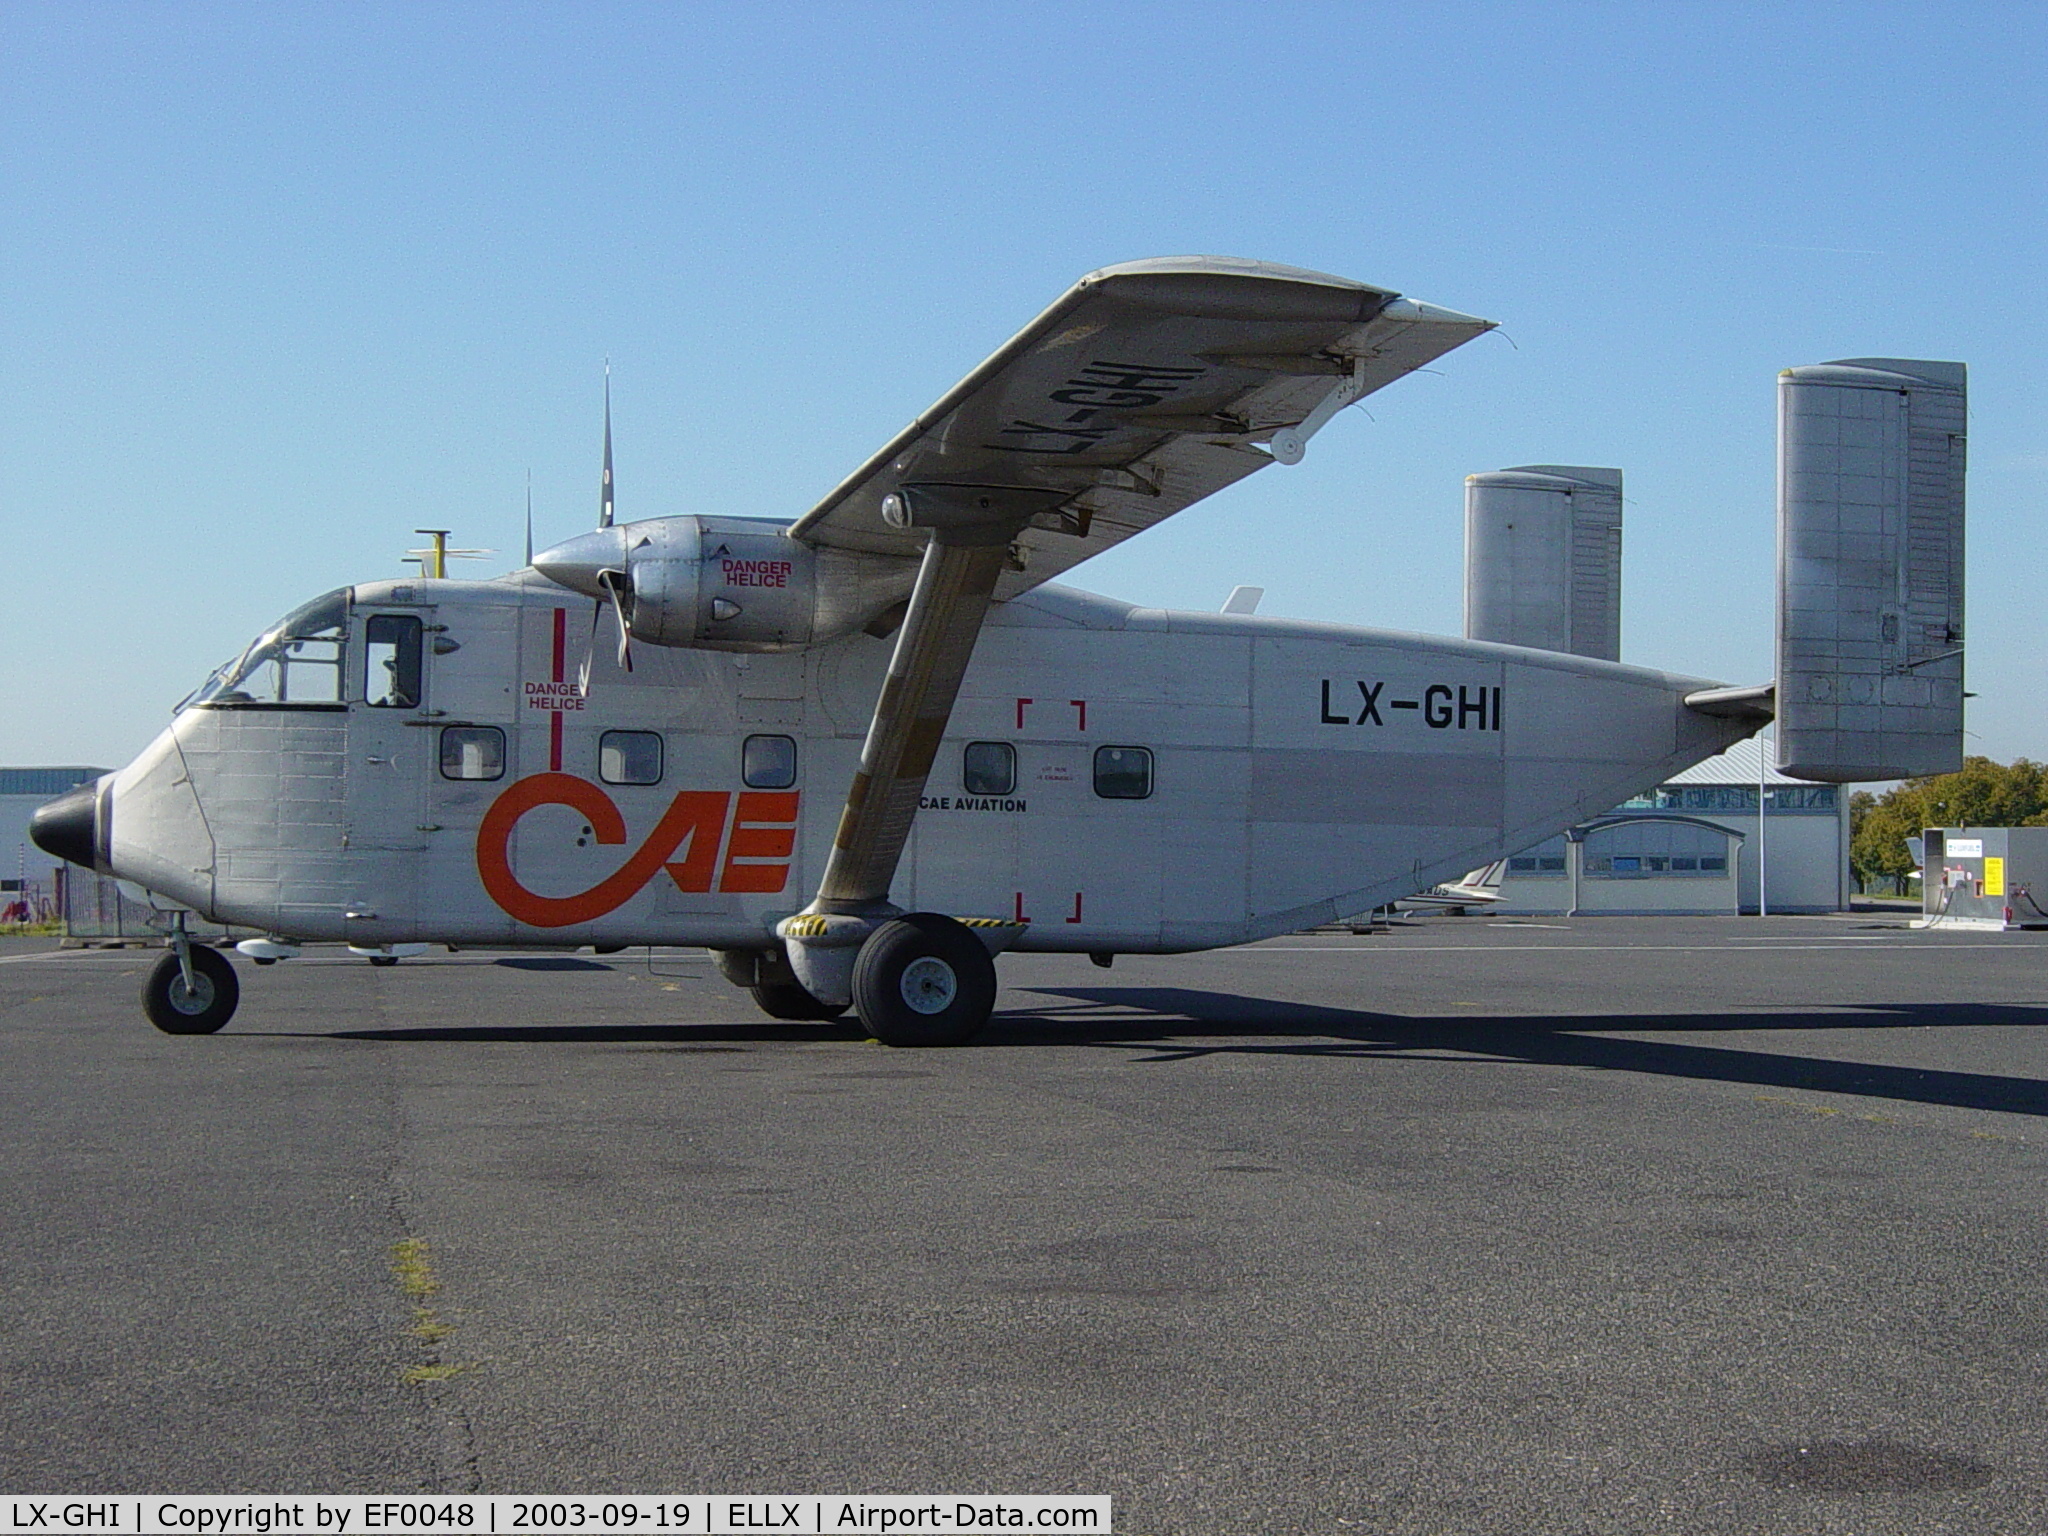 LX-GHI, 1971 Short SC-7 Skyvan 3M-400 C/N SH.1890, Used for para-dropping contract